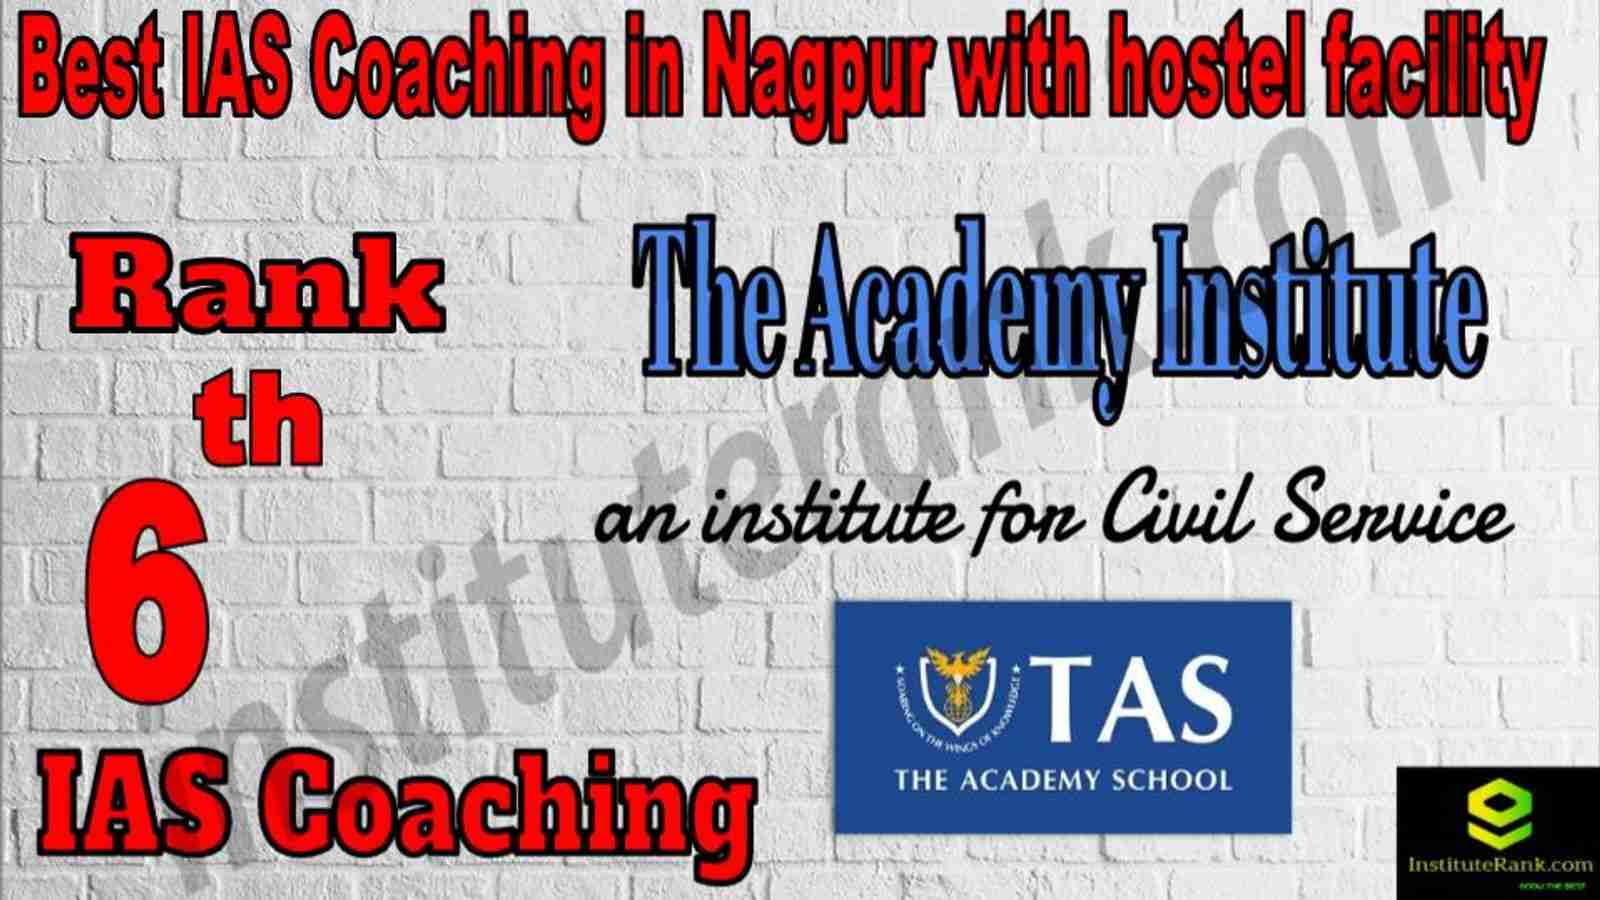 6th Best IAS Coaching in Nagpur with hostel facility